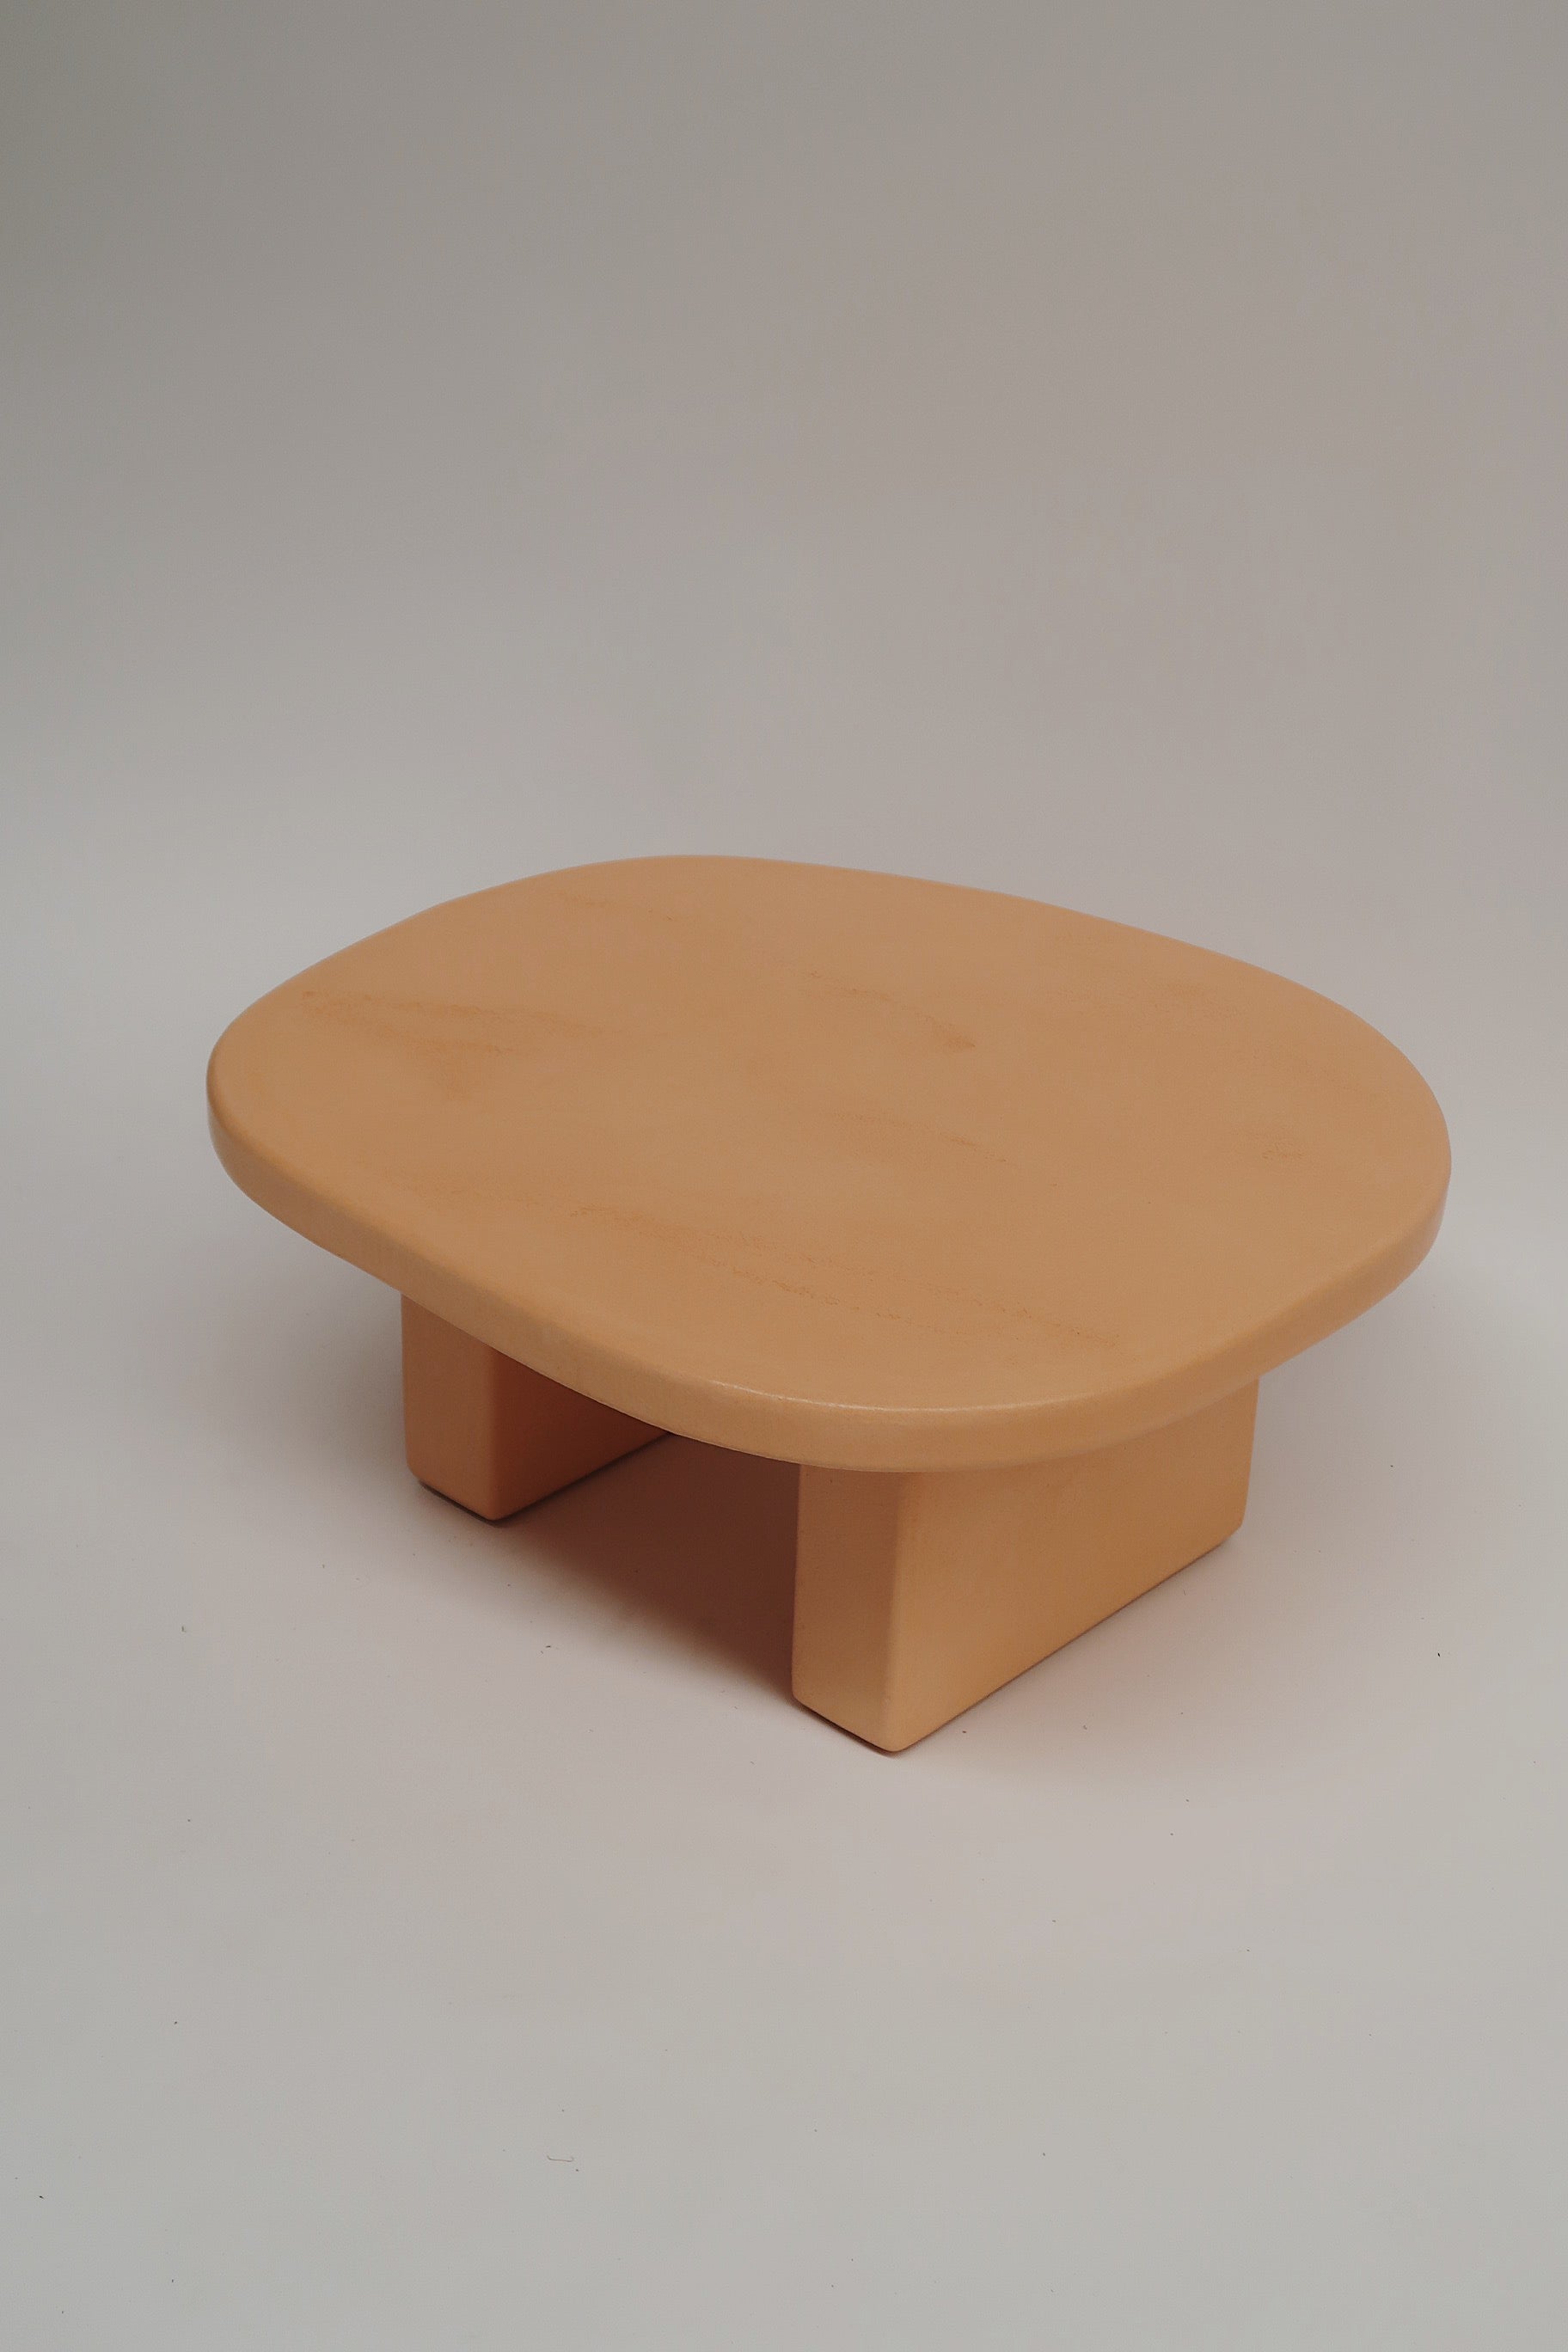 Sola Coffee Table in Terracotta